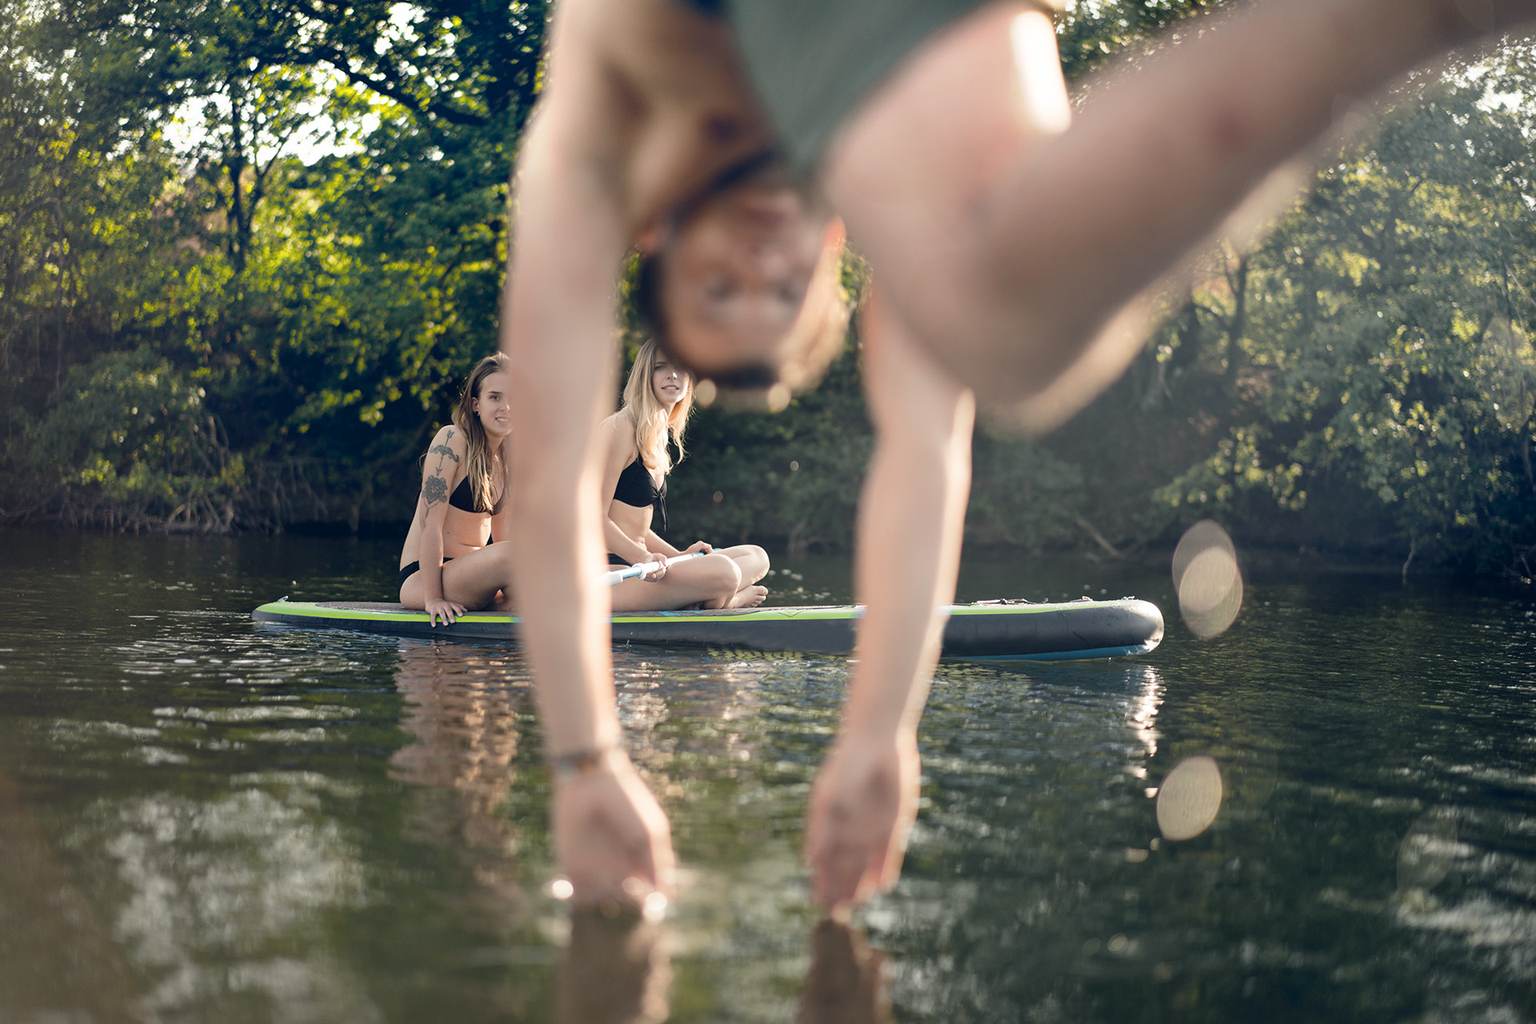 A man jumps into a river with a header. In the background, two women sit on a paddle board.